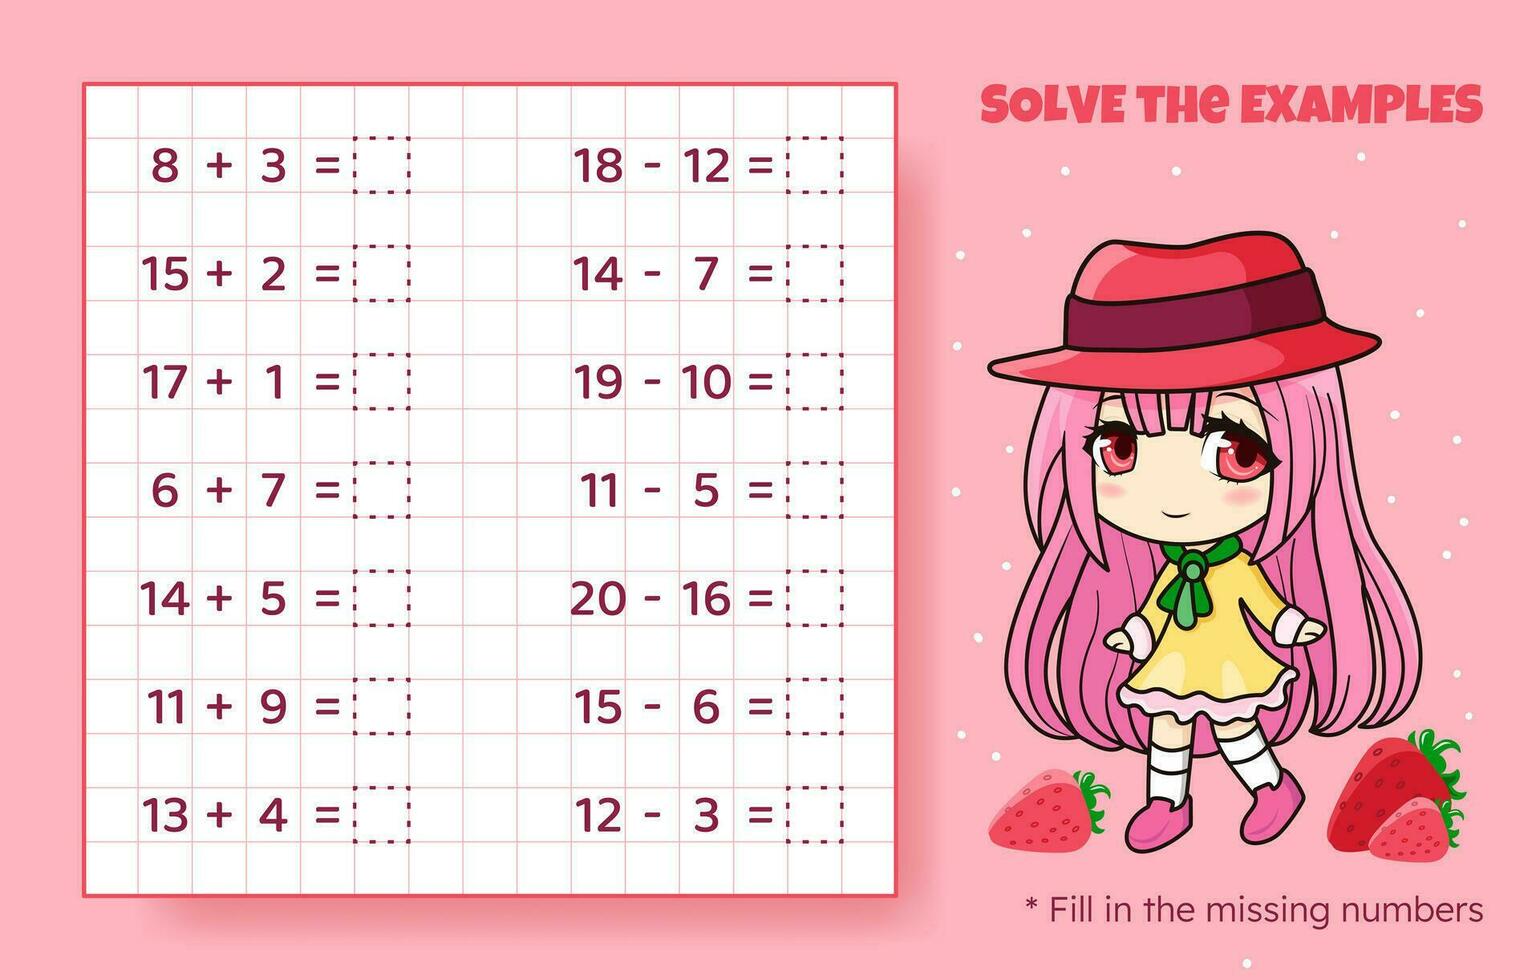 Solve the examples. Addition and subtraction up to 20. Mathematical puzzle game. Worksheet for preschool kids. Vector illustration. Cartoon educational game with cute anime girl for children.